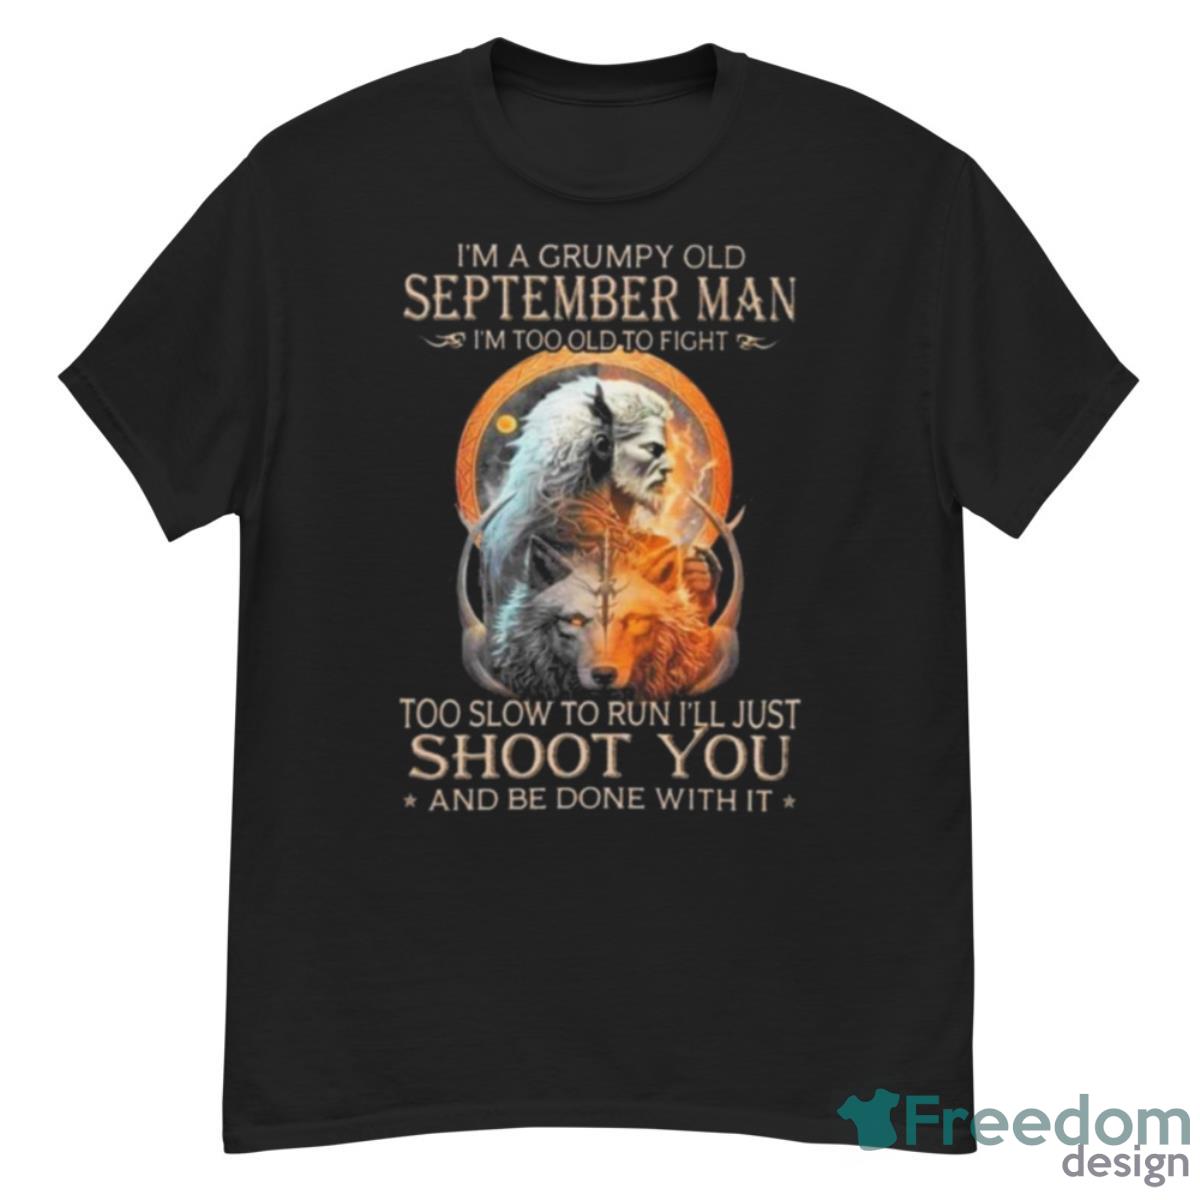 King Wolf I’m A Grumpy Old September Man I’m Too Old To Fight Too Slow To Run I’ll Just Shoot You And Be Done With It Shirt - G500 Men’s Classic T-Shirt